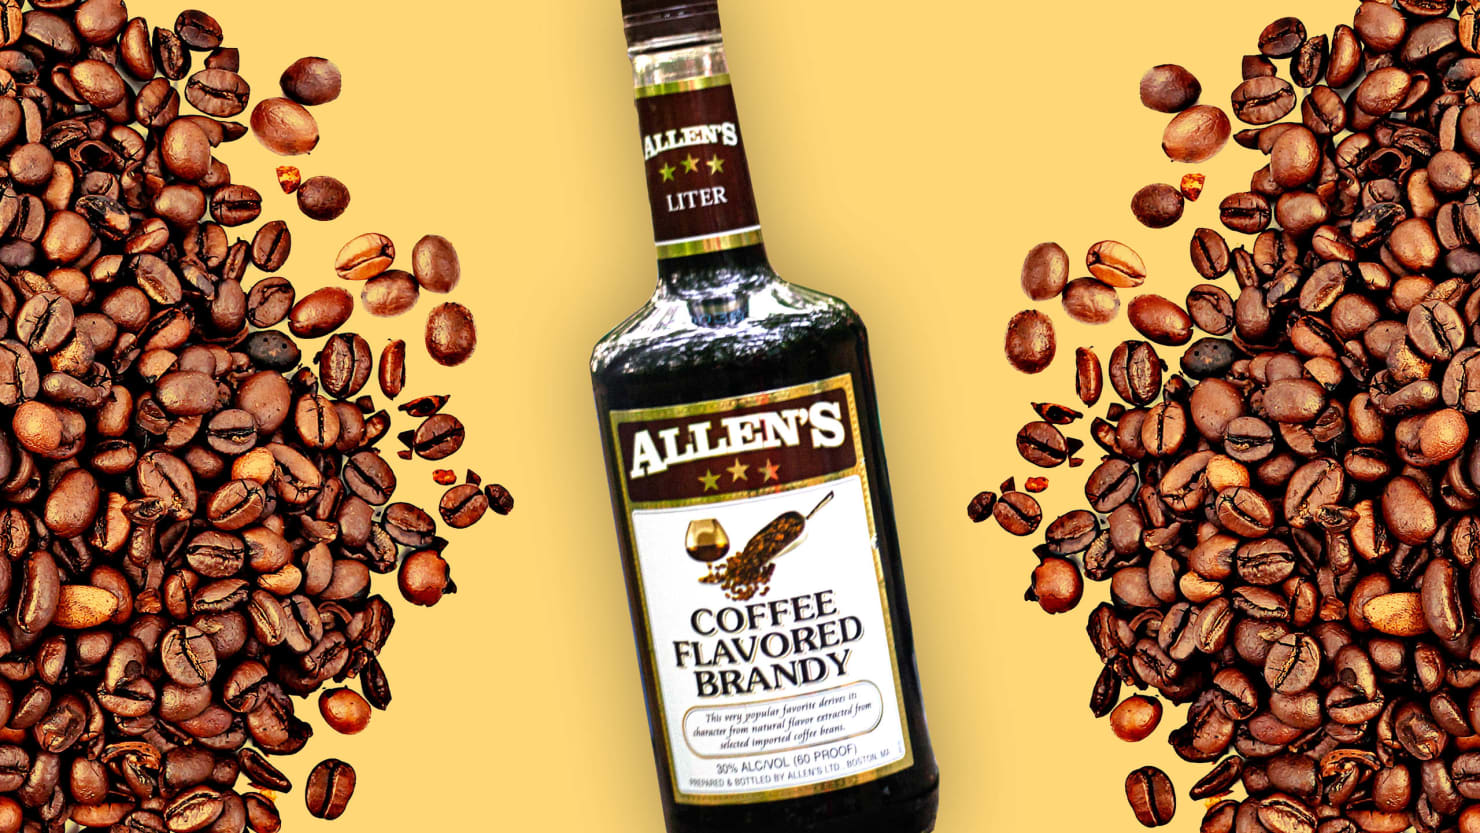 Maine’s Obsession With Allen’s Coffee Flavored Brandy